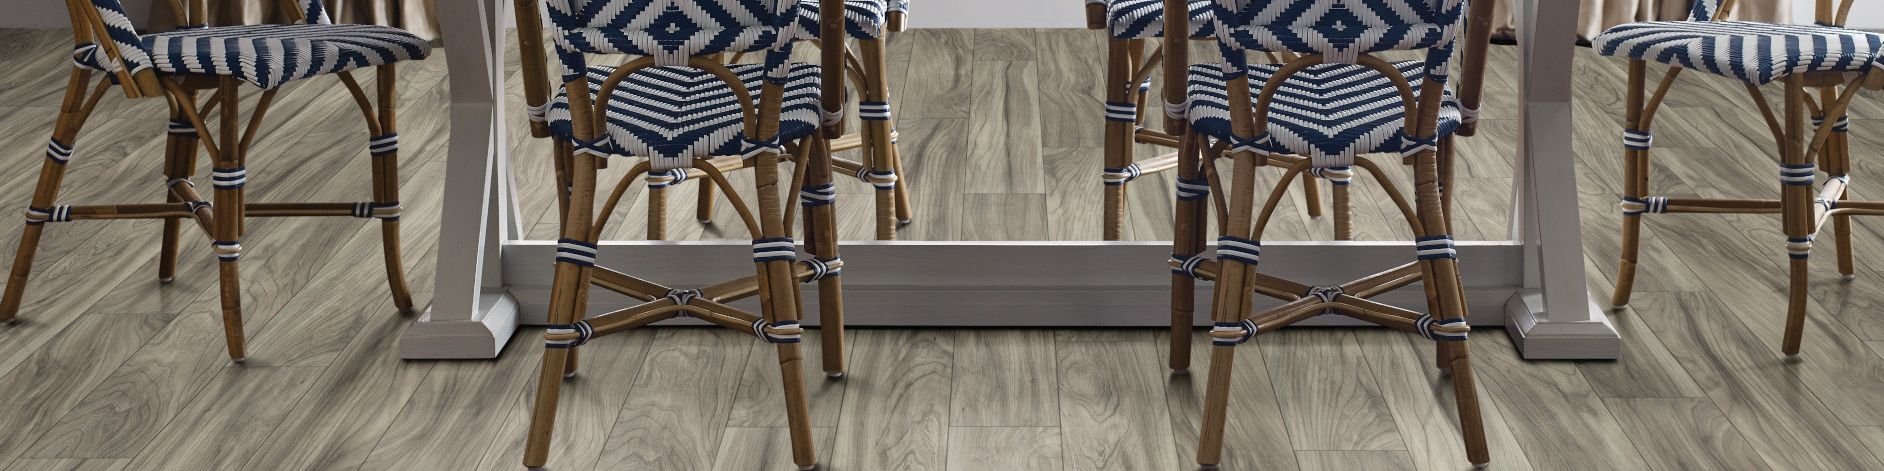 woven dining chairs around a dining table - from Carpet and Tile Junction